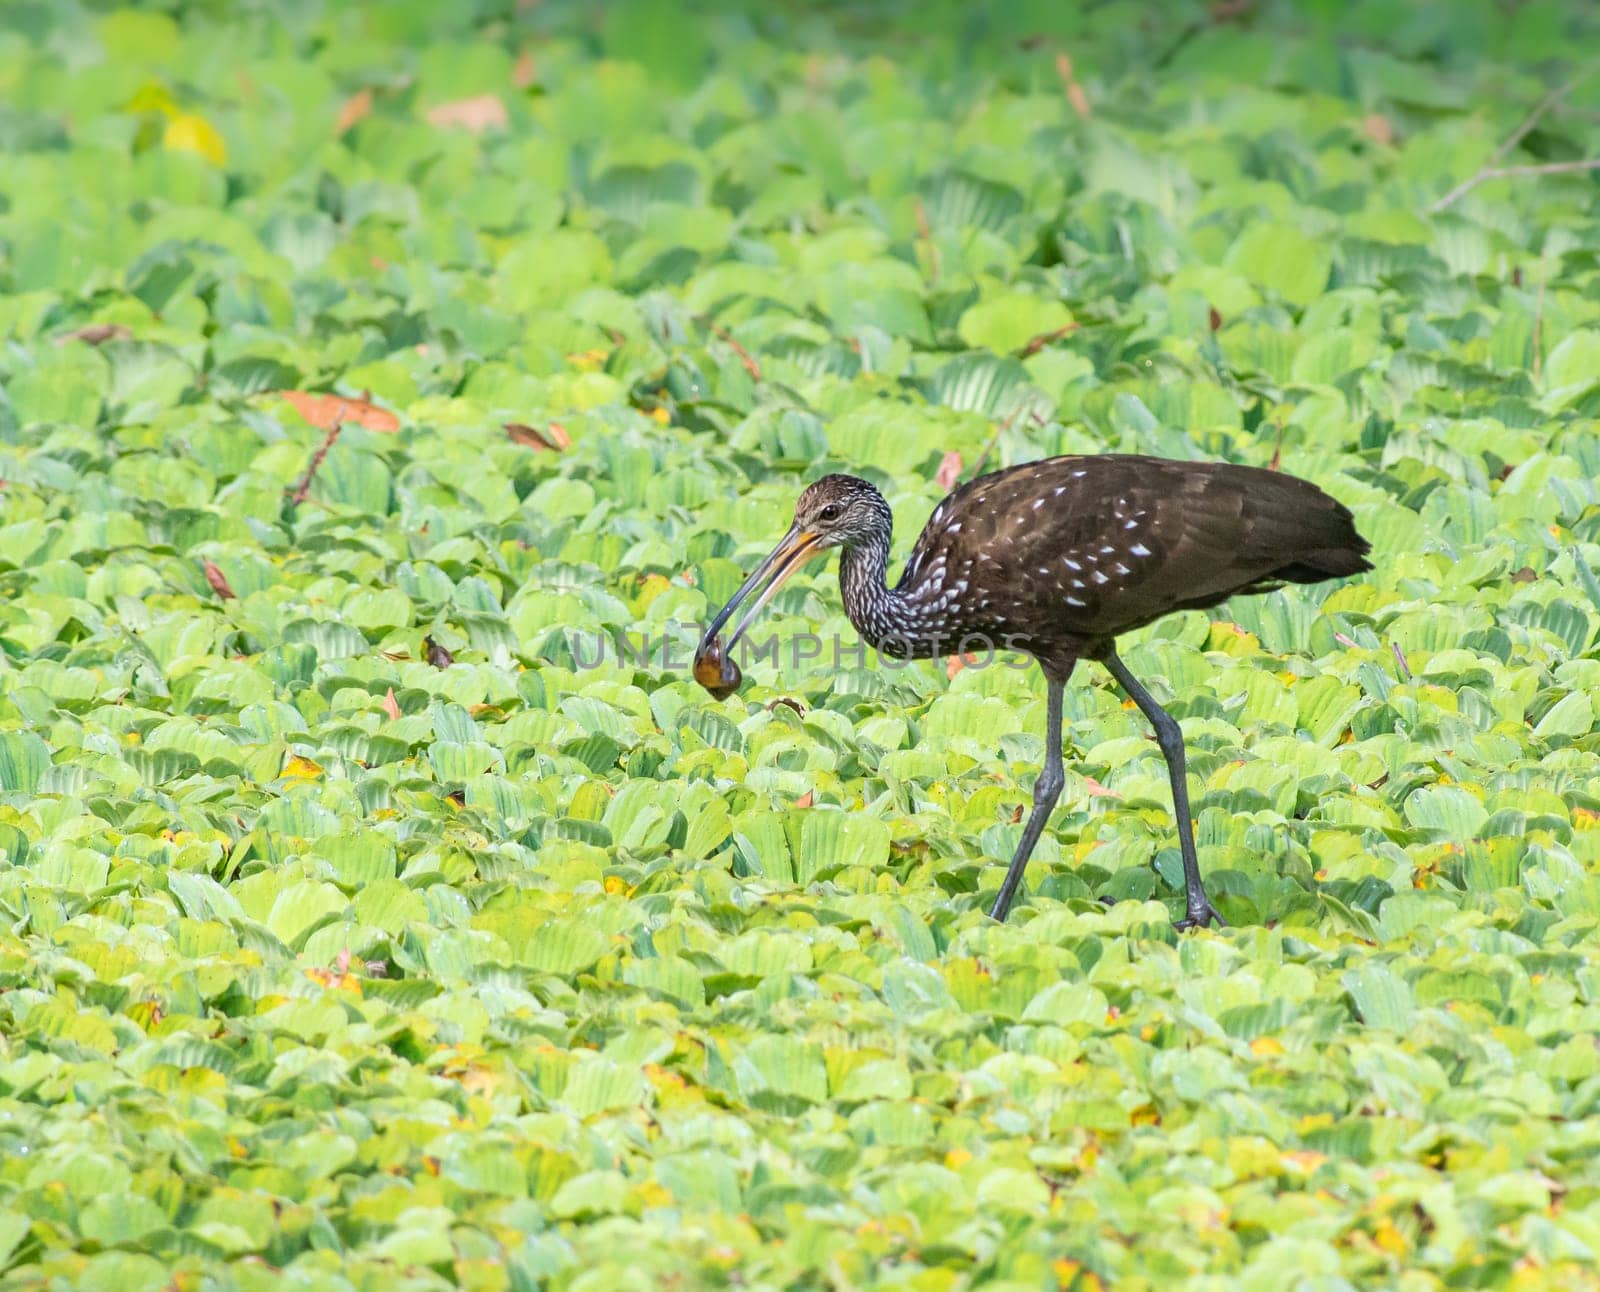 A Limpkin with a snail snack in a marsh in Guatemala